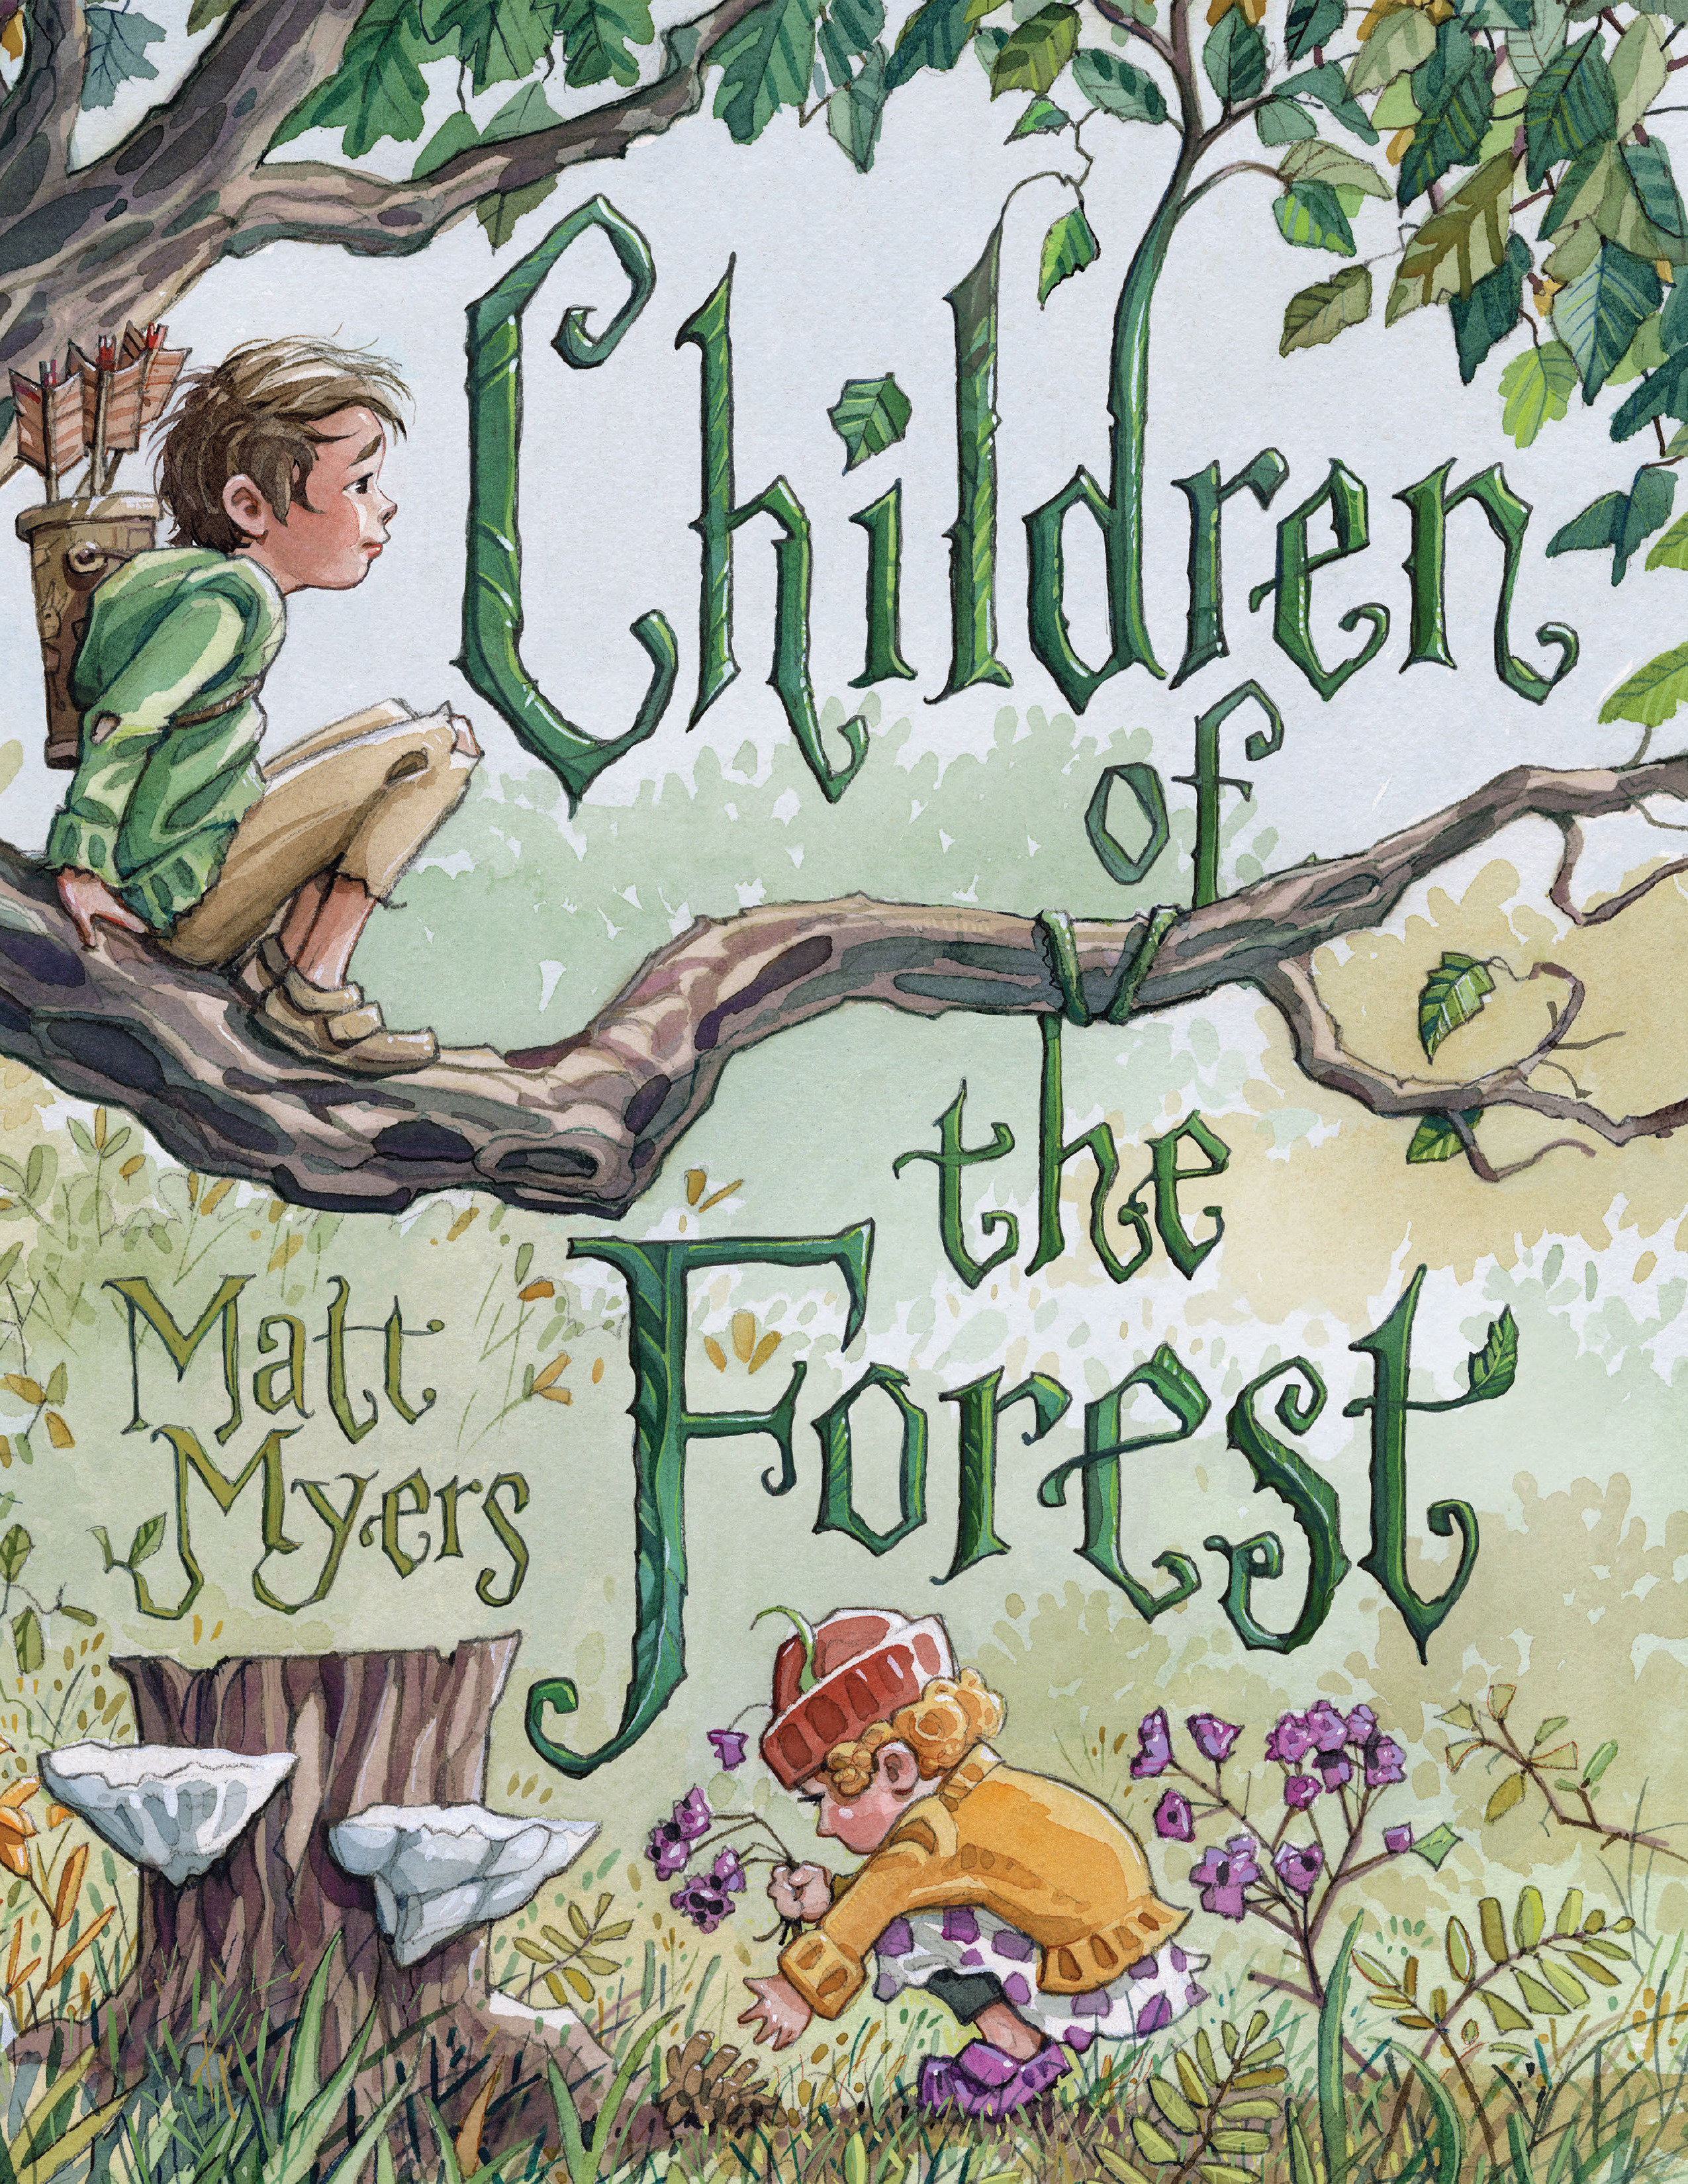 Children Of The Forest (Hardcover Book)